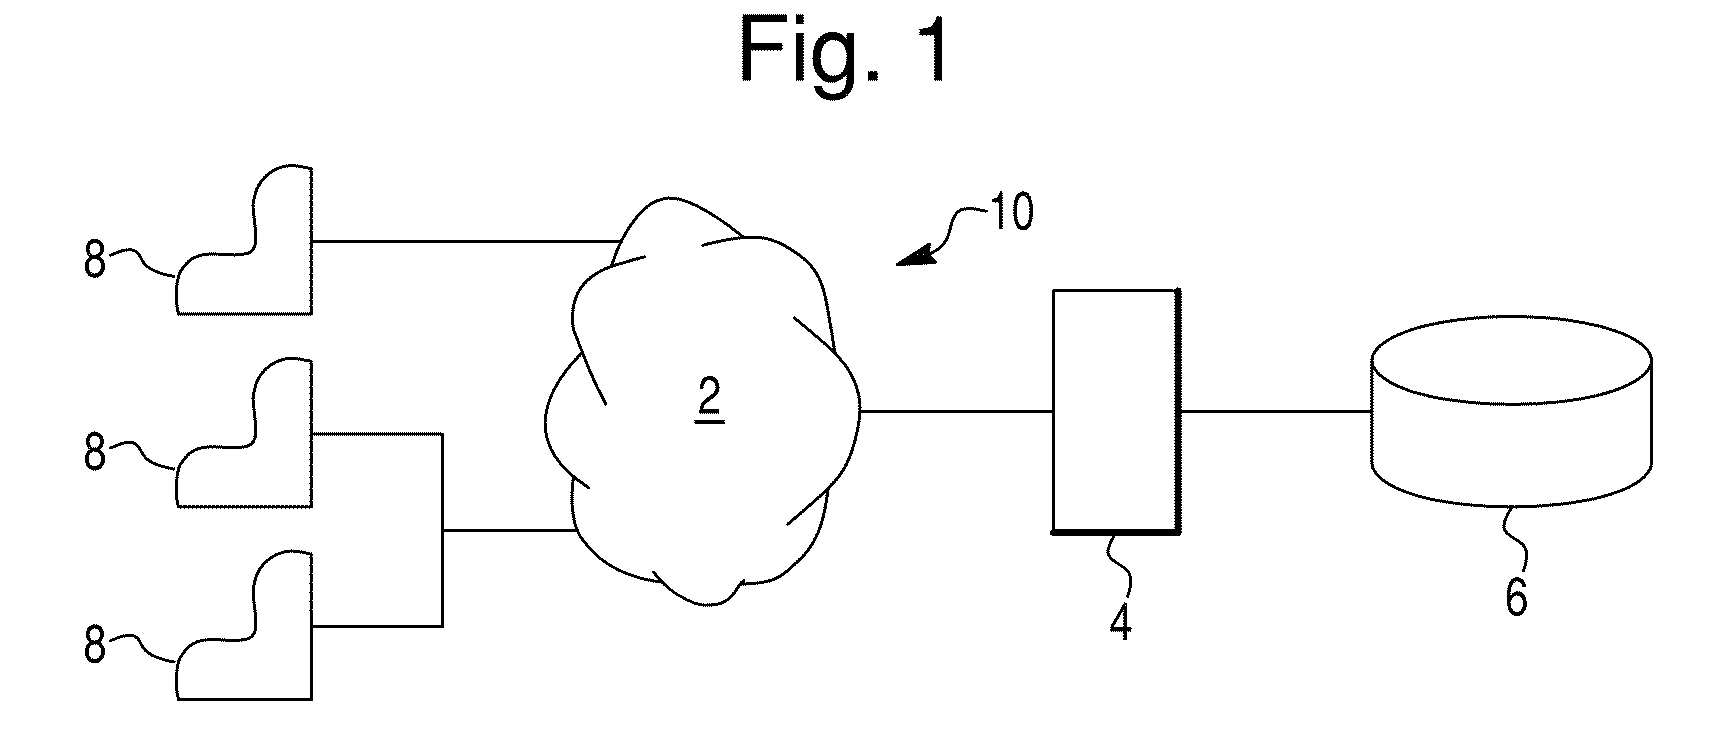 Gaming participant attribute tag method and system